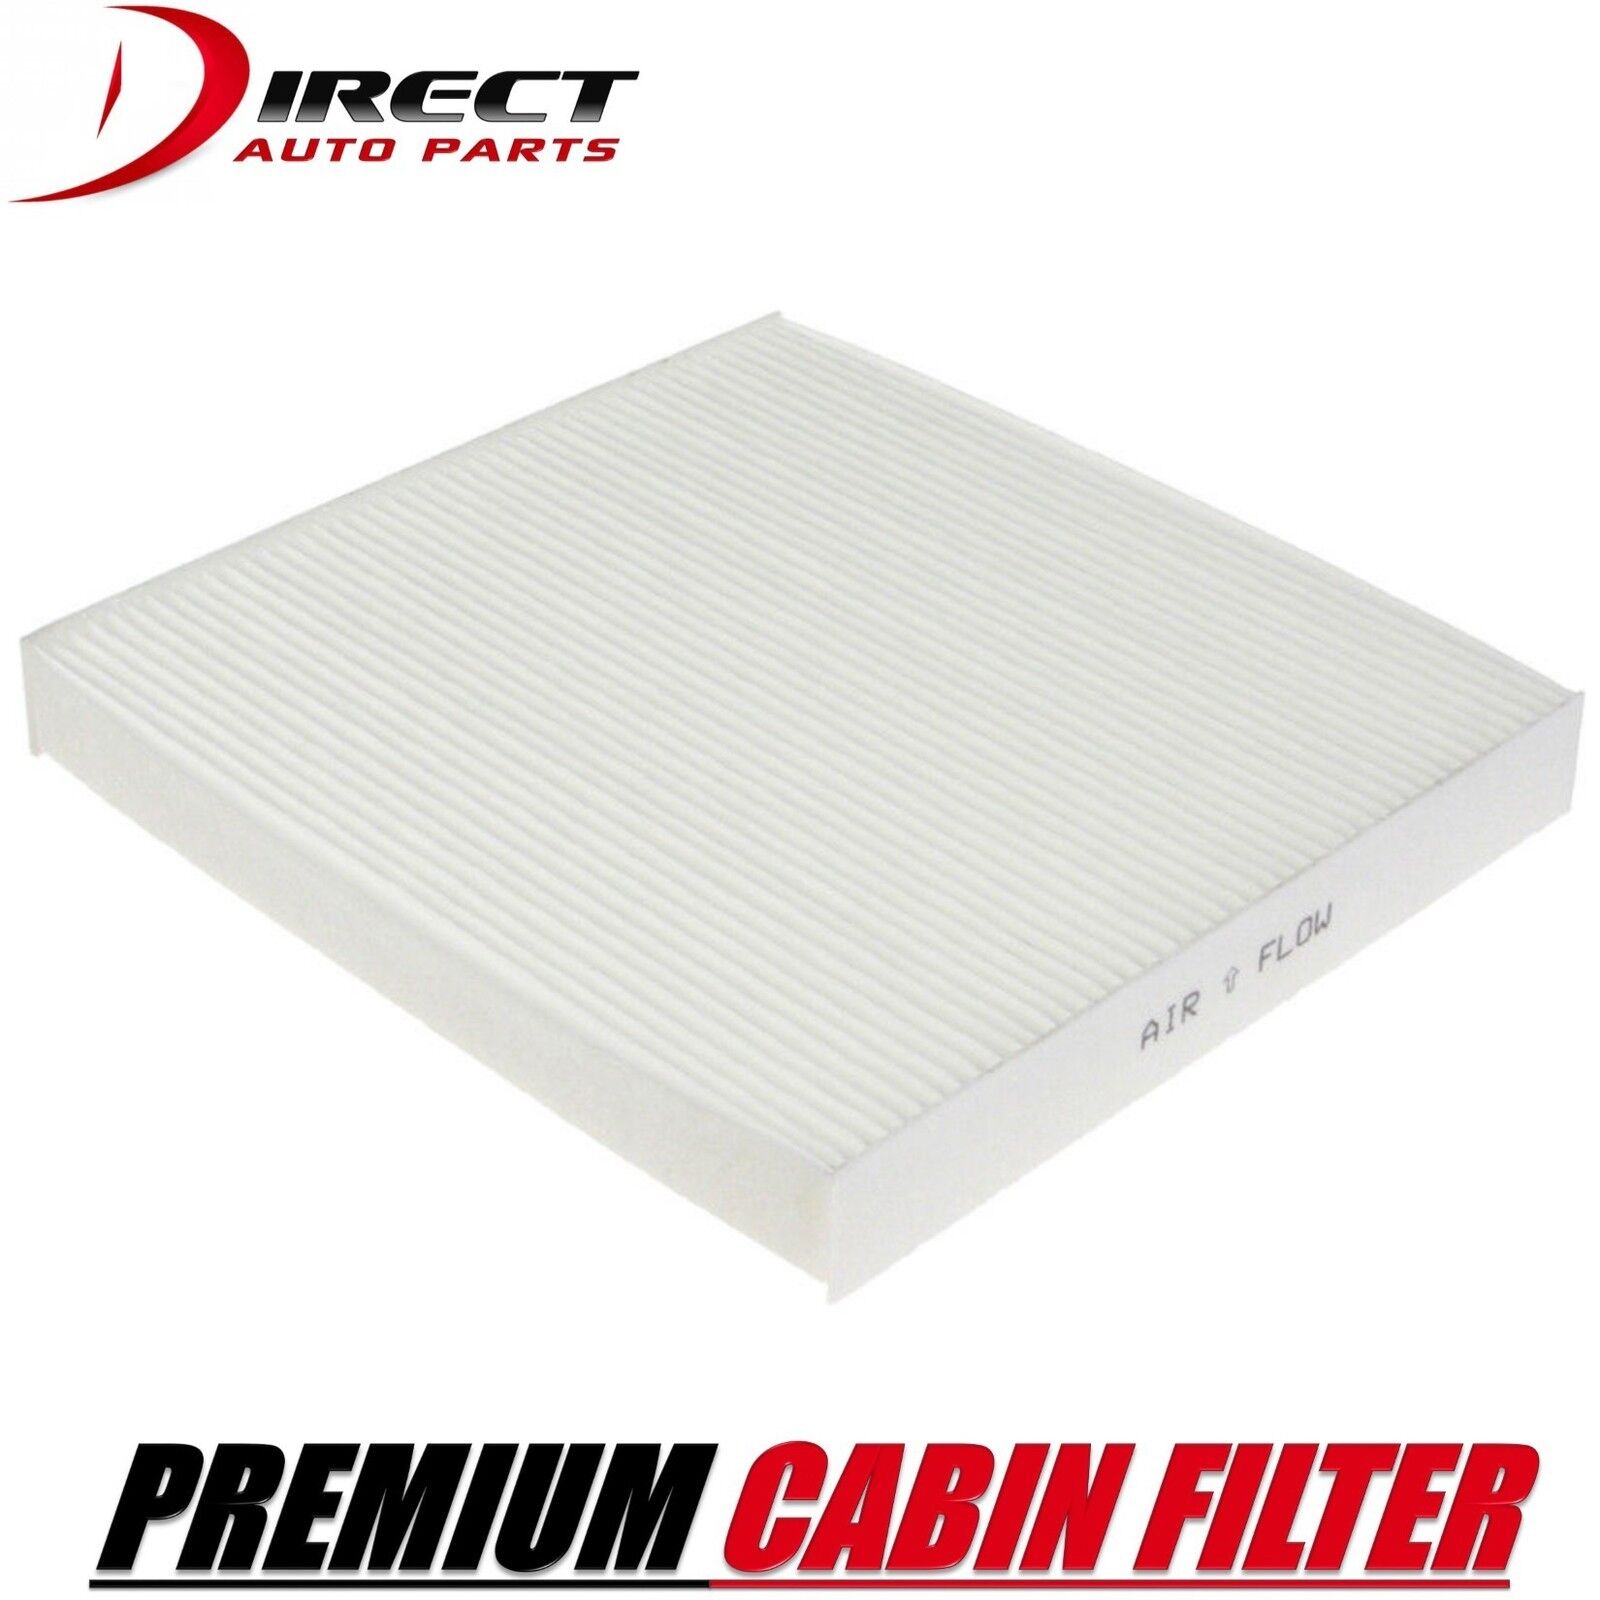 NISSAN CABIN AIR FILTER FOR NISSAN MURANO 2009 - 2014